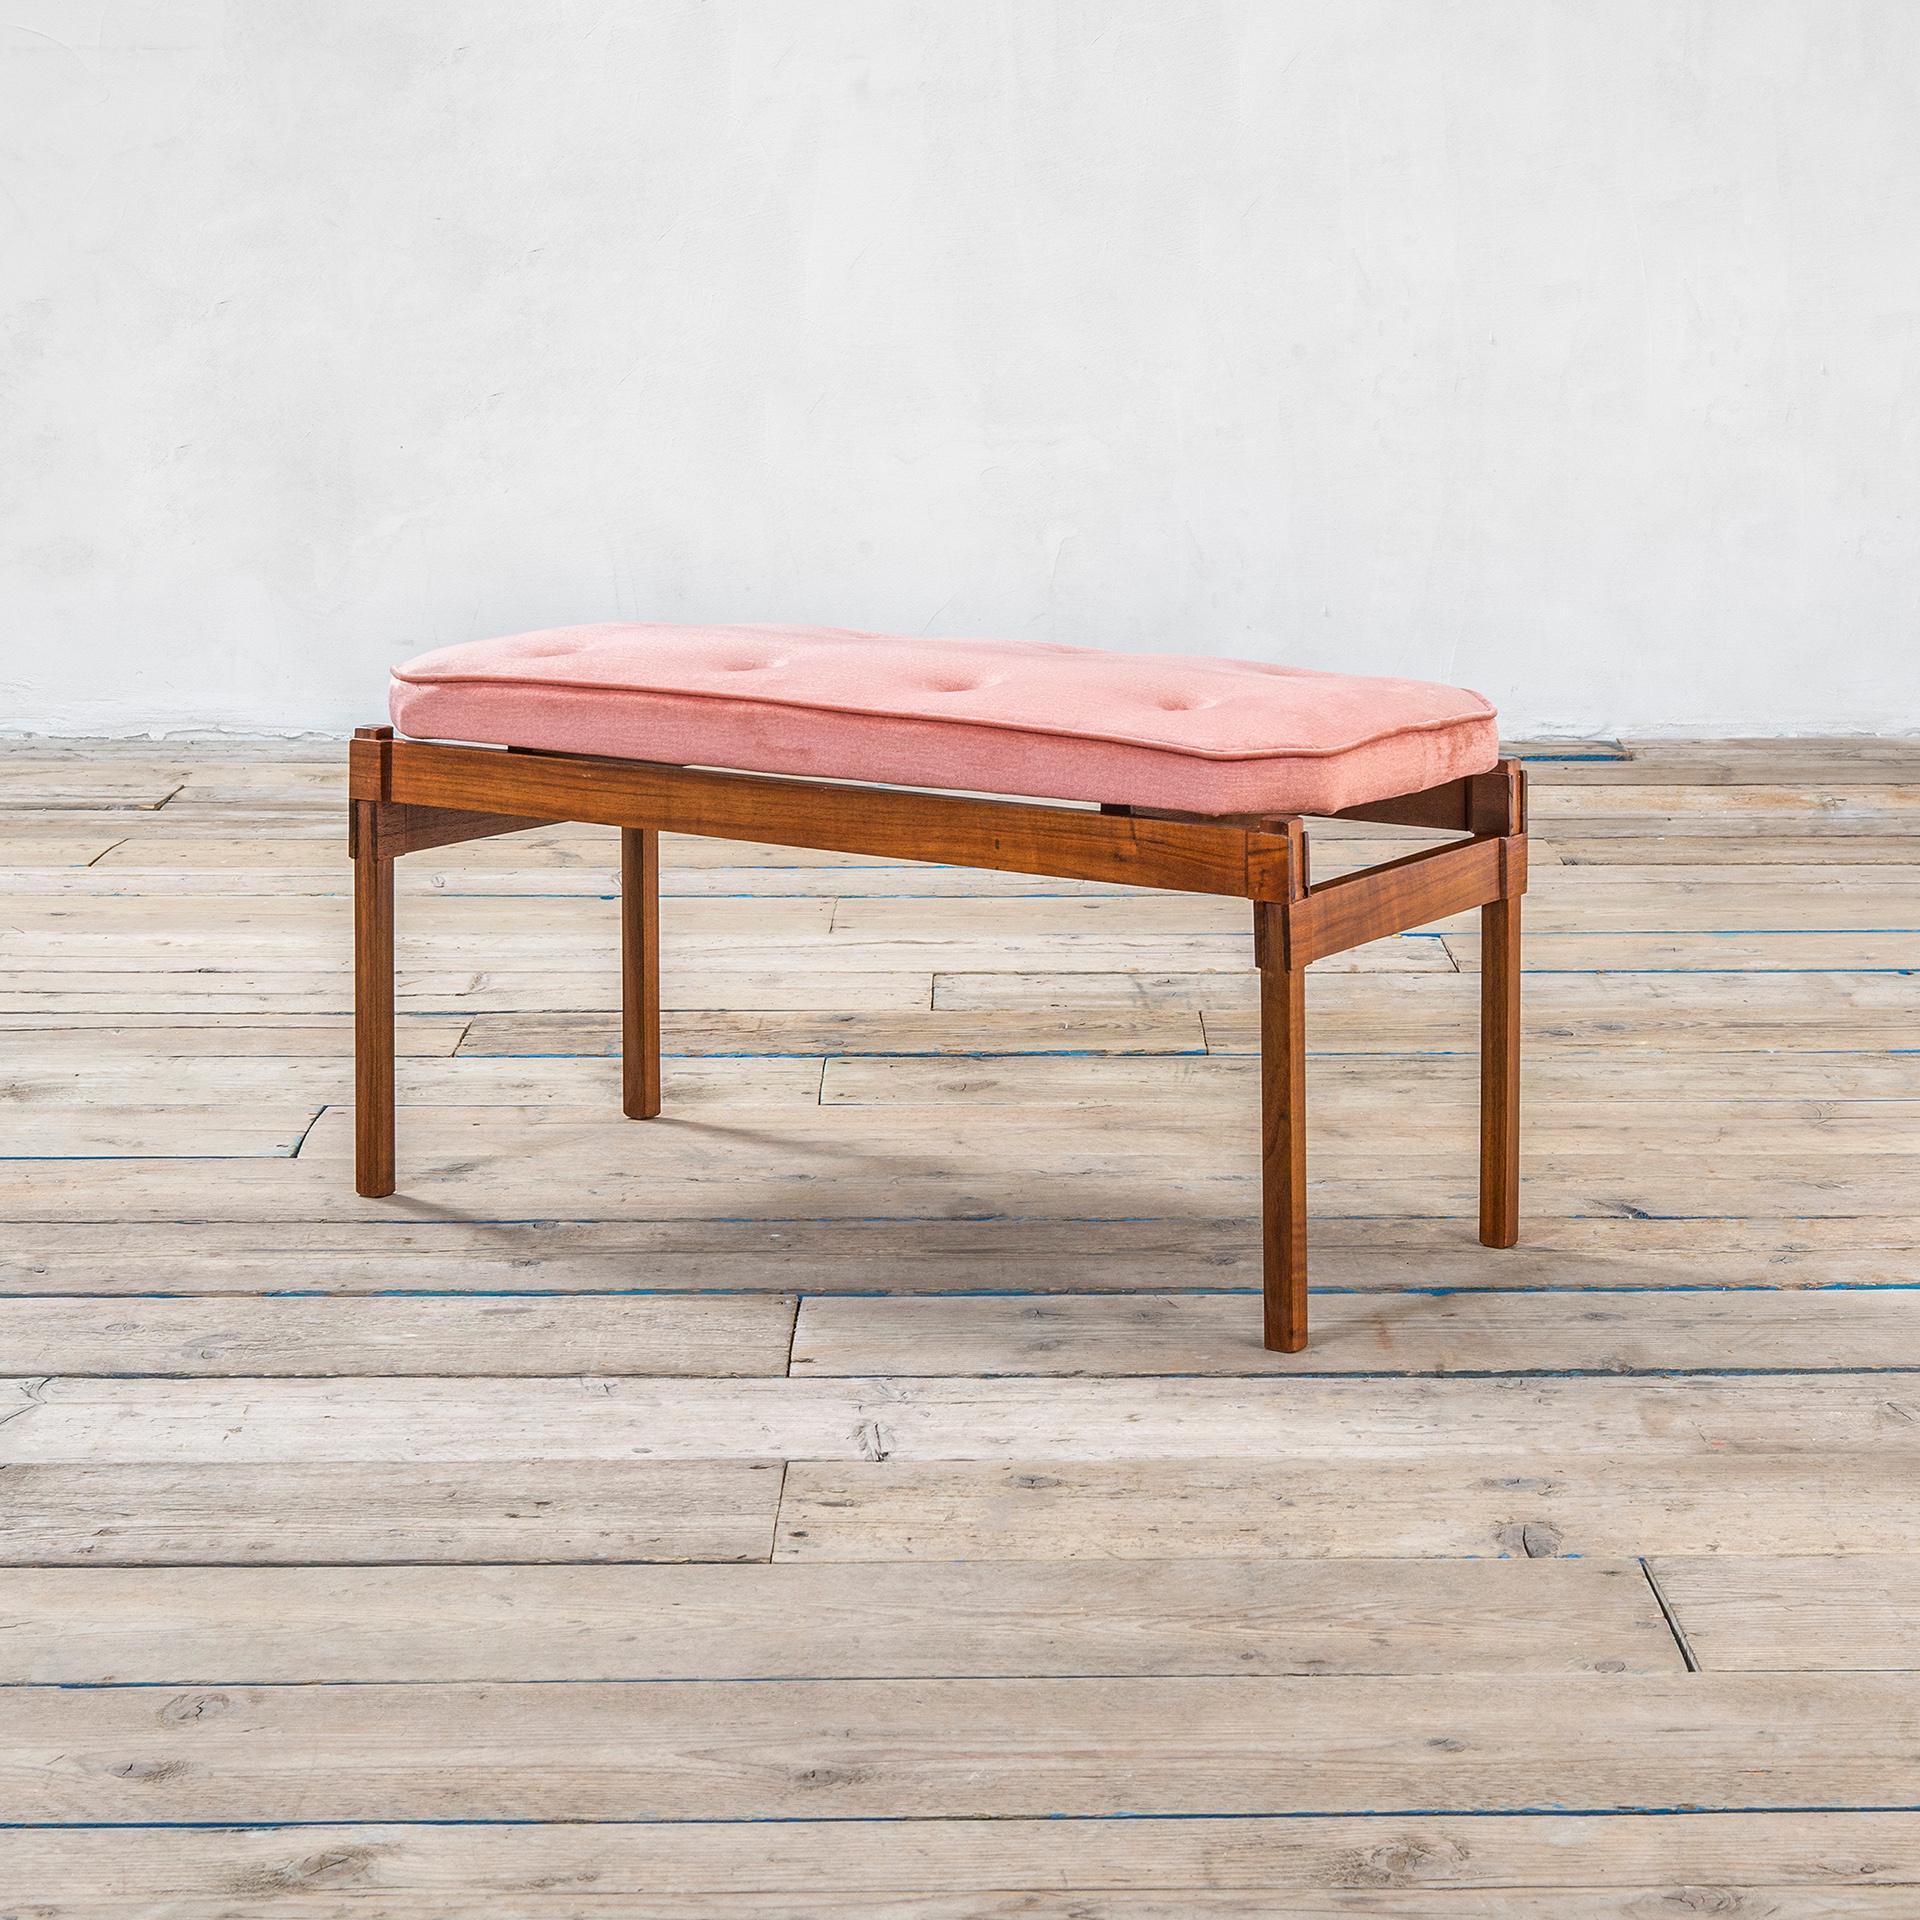 Bench designed by the great italian master Ico Parisi in '50s. The bench has a wooden structure (teak) with wonderful attention for the corner joints, and the seating is covered by pink velvet. The upholstery was renewed so you can consider this